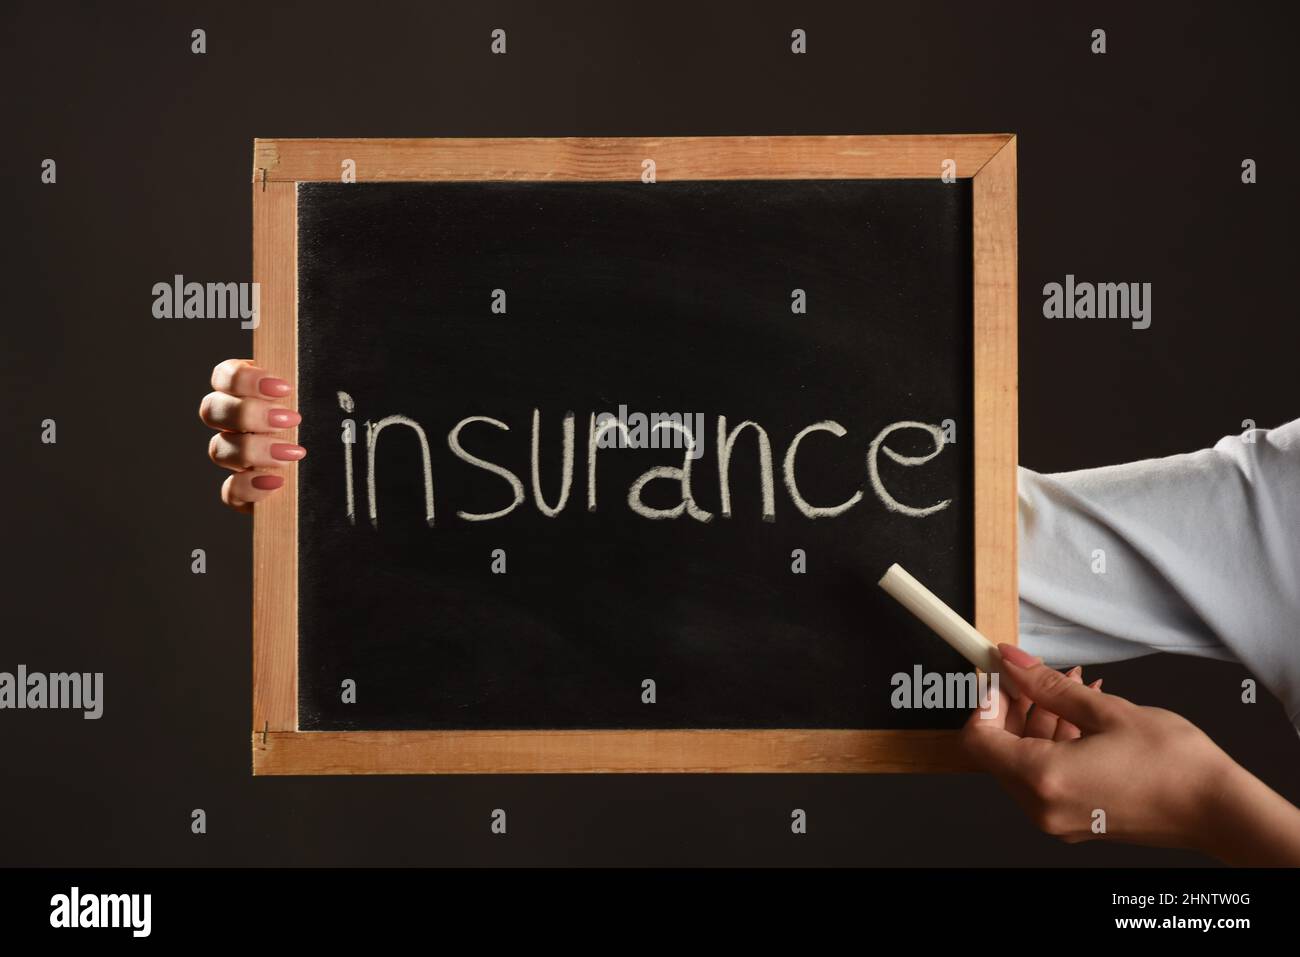 sign or symbol for insurance industry, taking a precautionary step Stock Photo